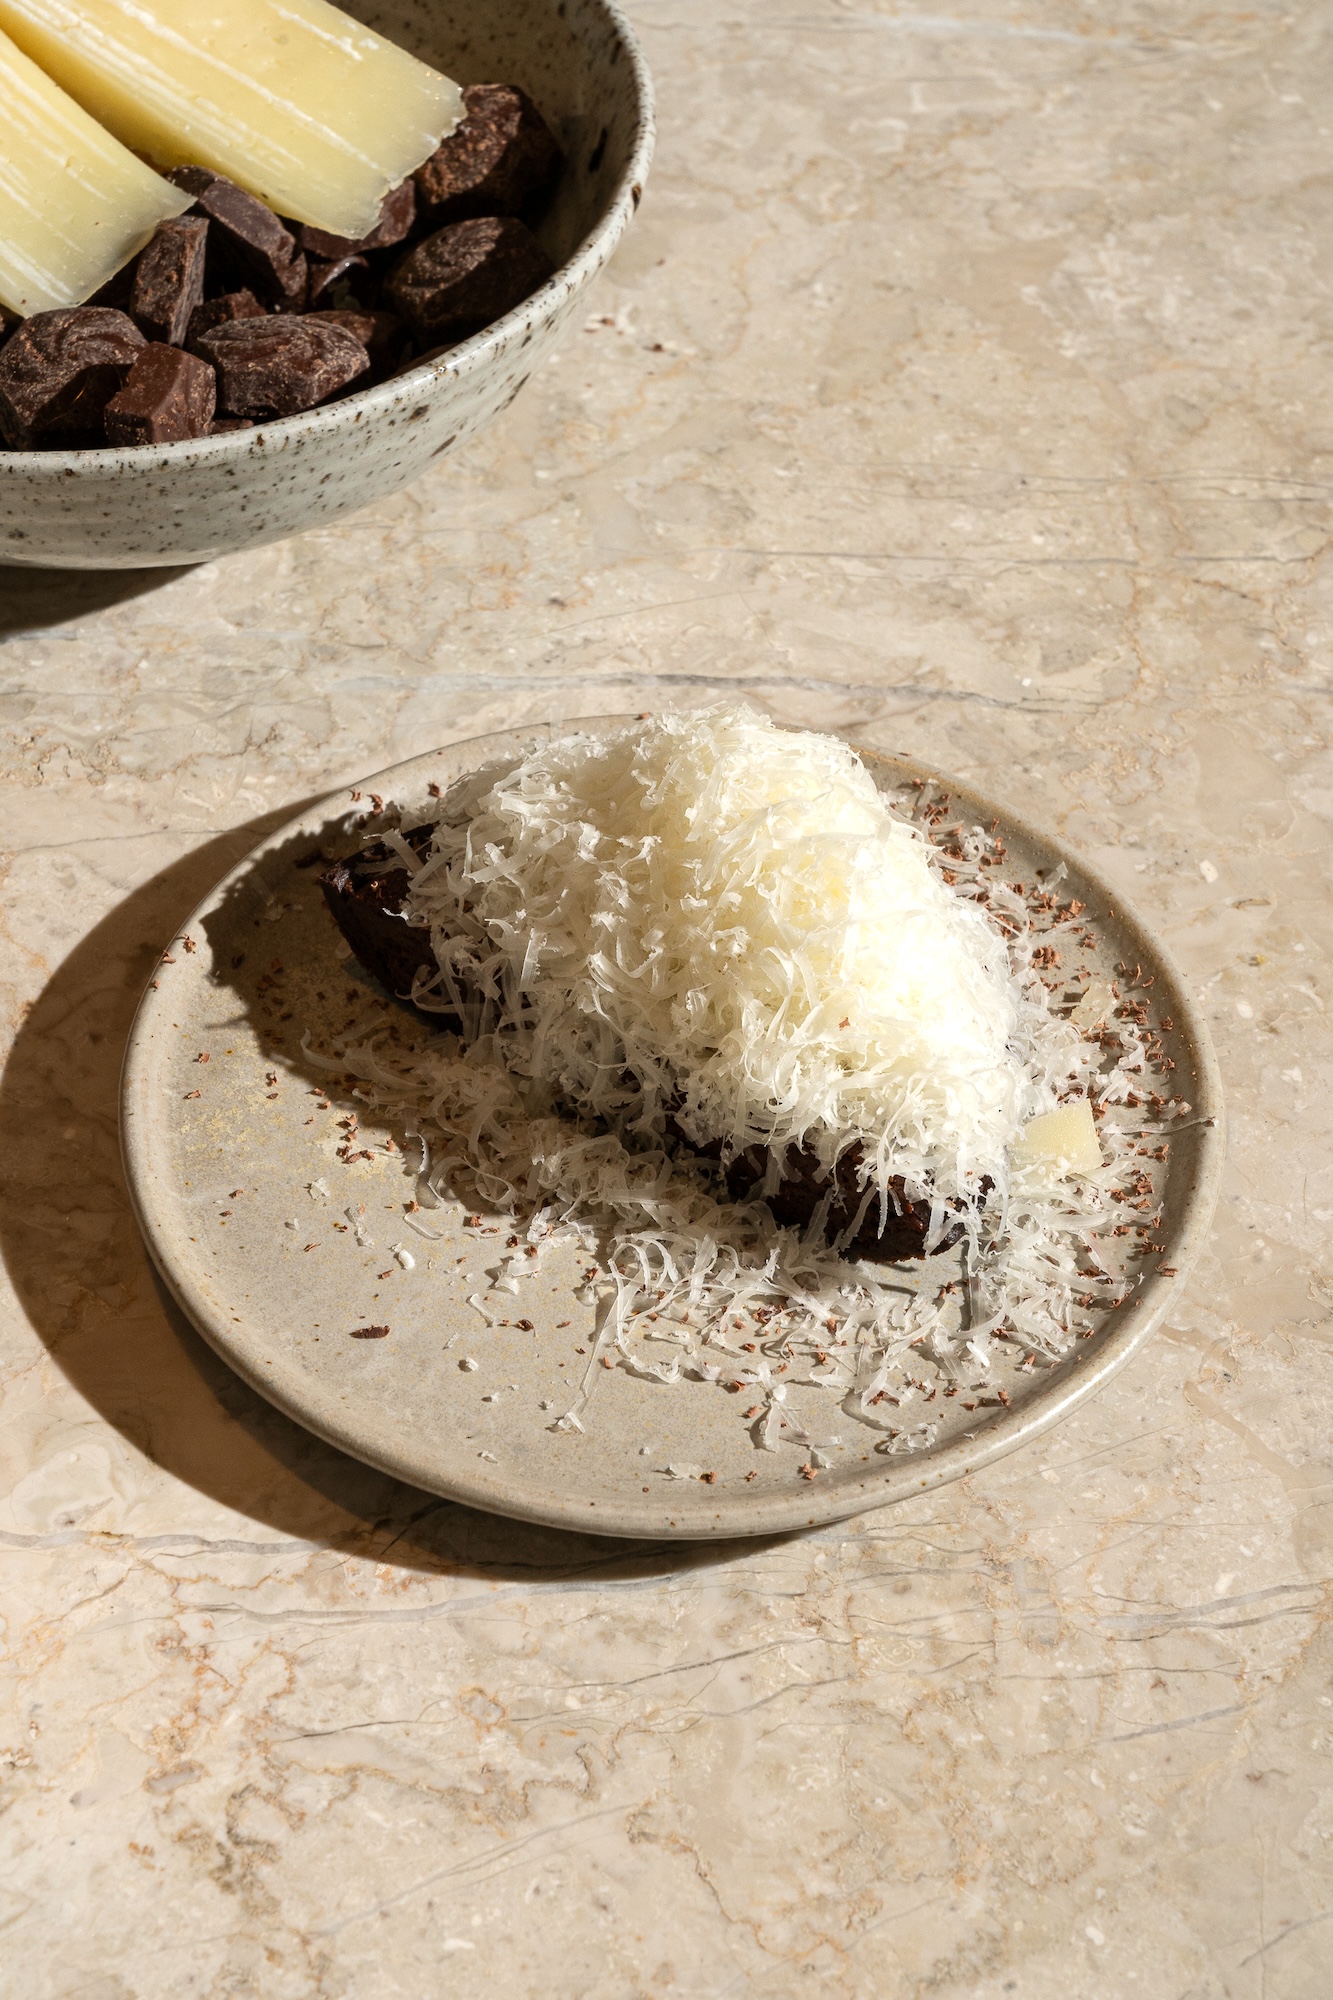 The choco tart is made with Davao chocolate and (more than) generously piled on with a mountain of Manchego cheese to add a little salty contrast to the dessert's sweetness